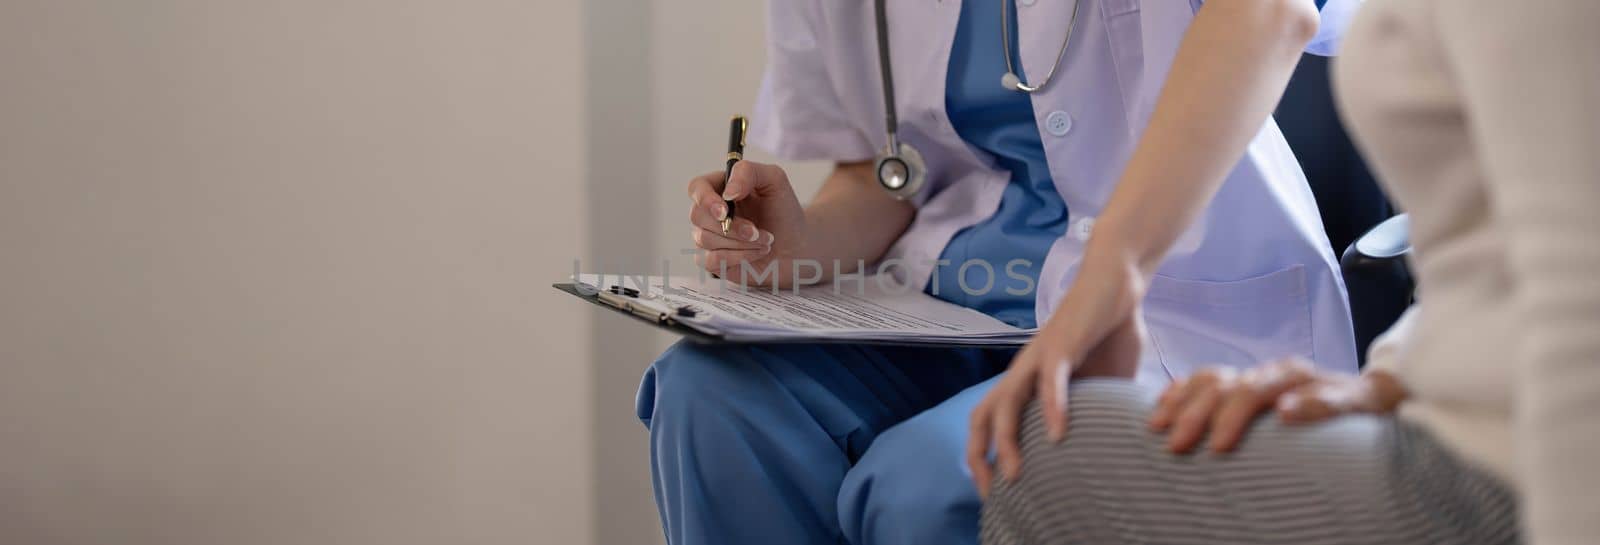 Asian female patient undergoing health check up while female doctor uses stethoscope to check heart rate in nurse, health care concept by wichayada